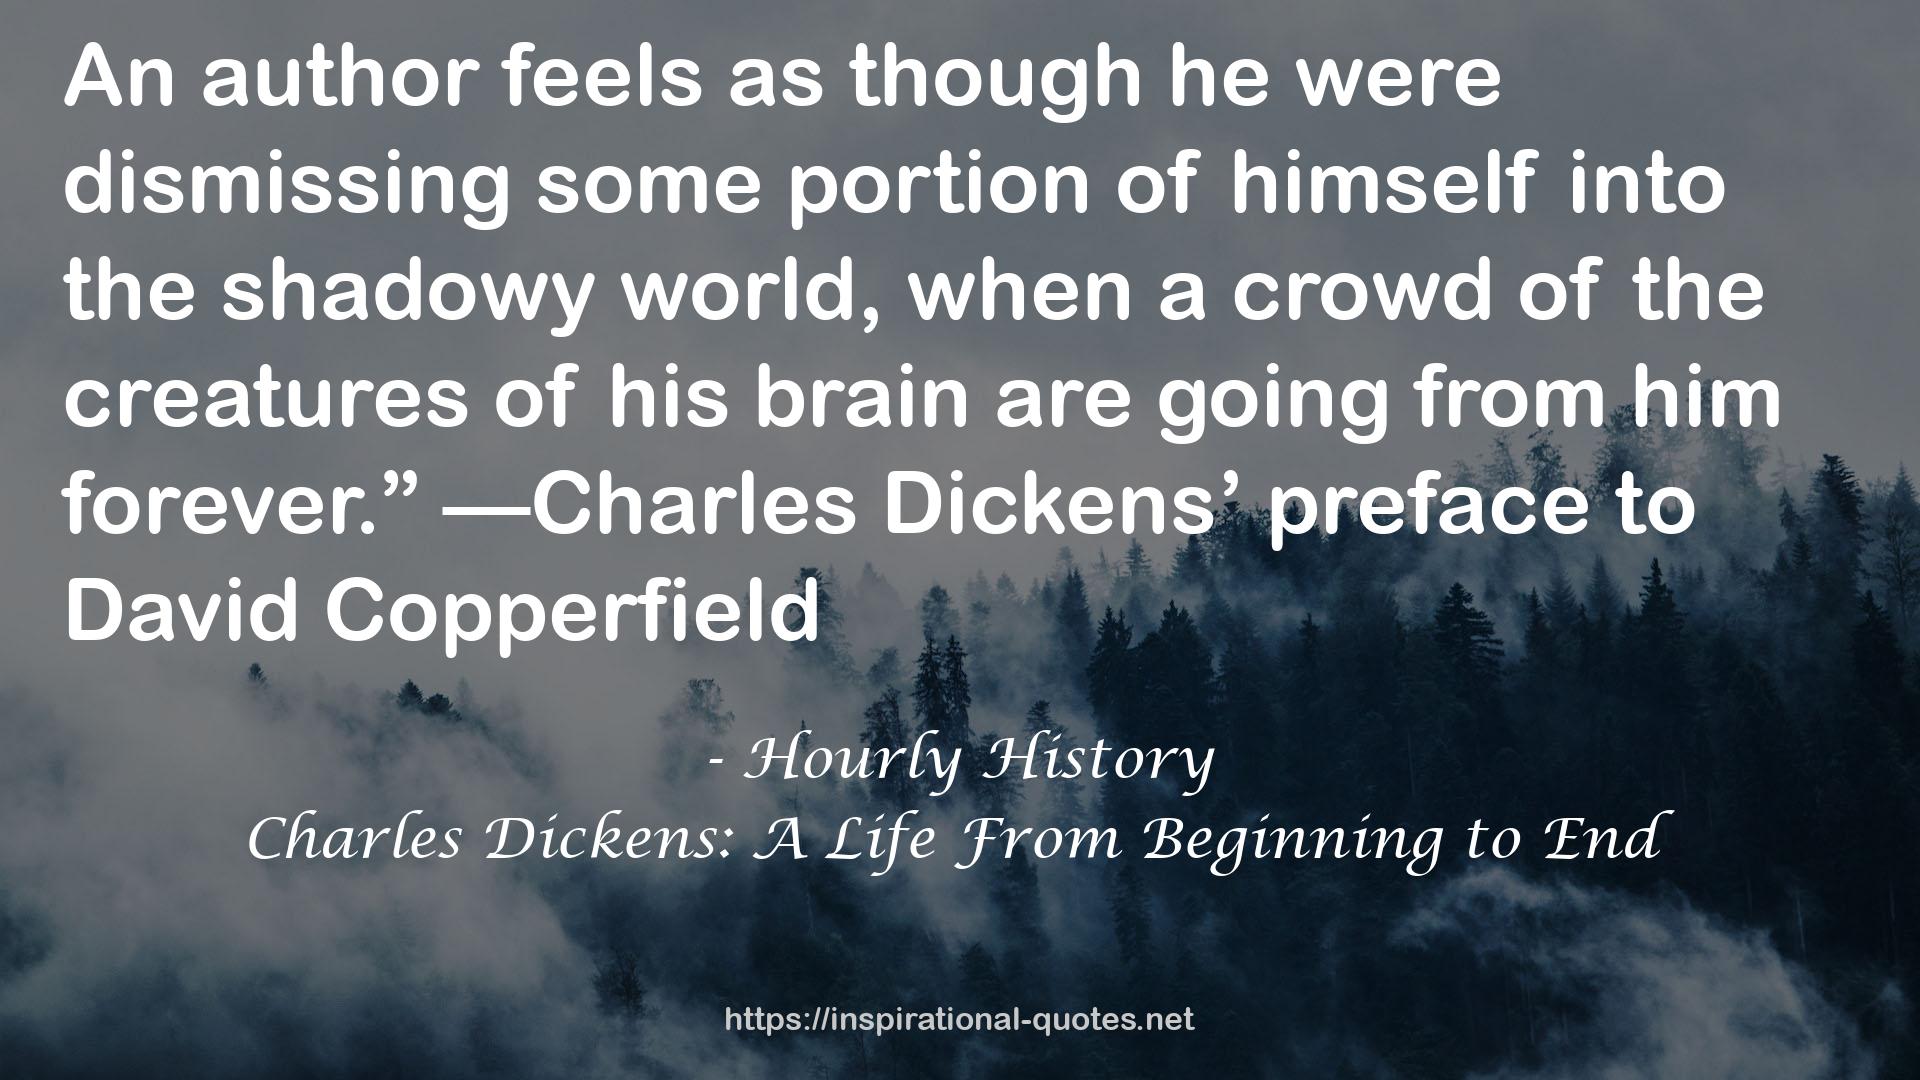 Charles Dickens: A Life From Beginning to End QUOTES